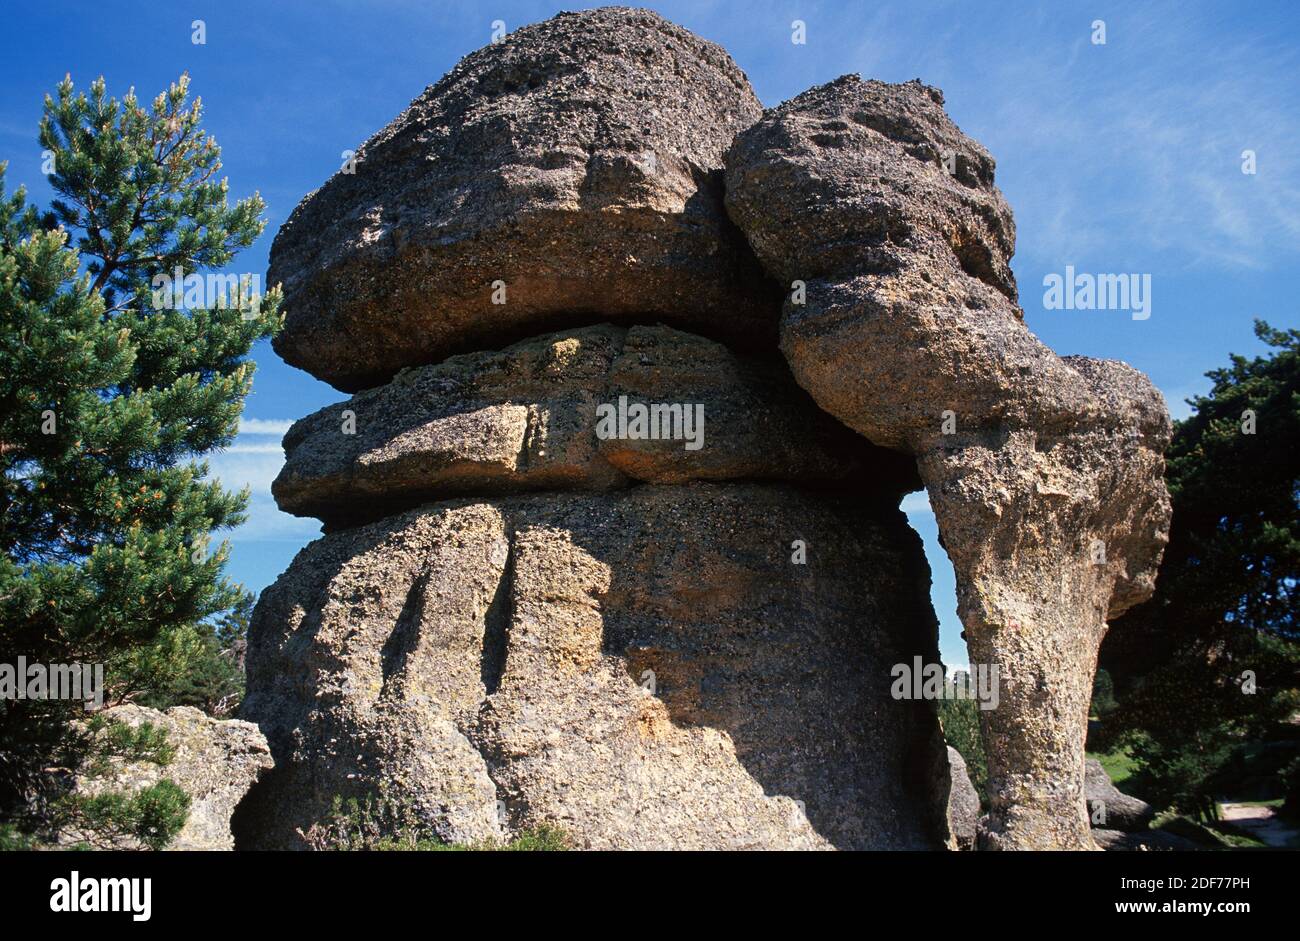 Singular relief formed by conglomerate rocks in Castroviejo, Soria, Spain. Stock Photo